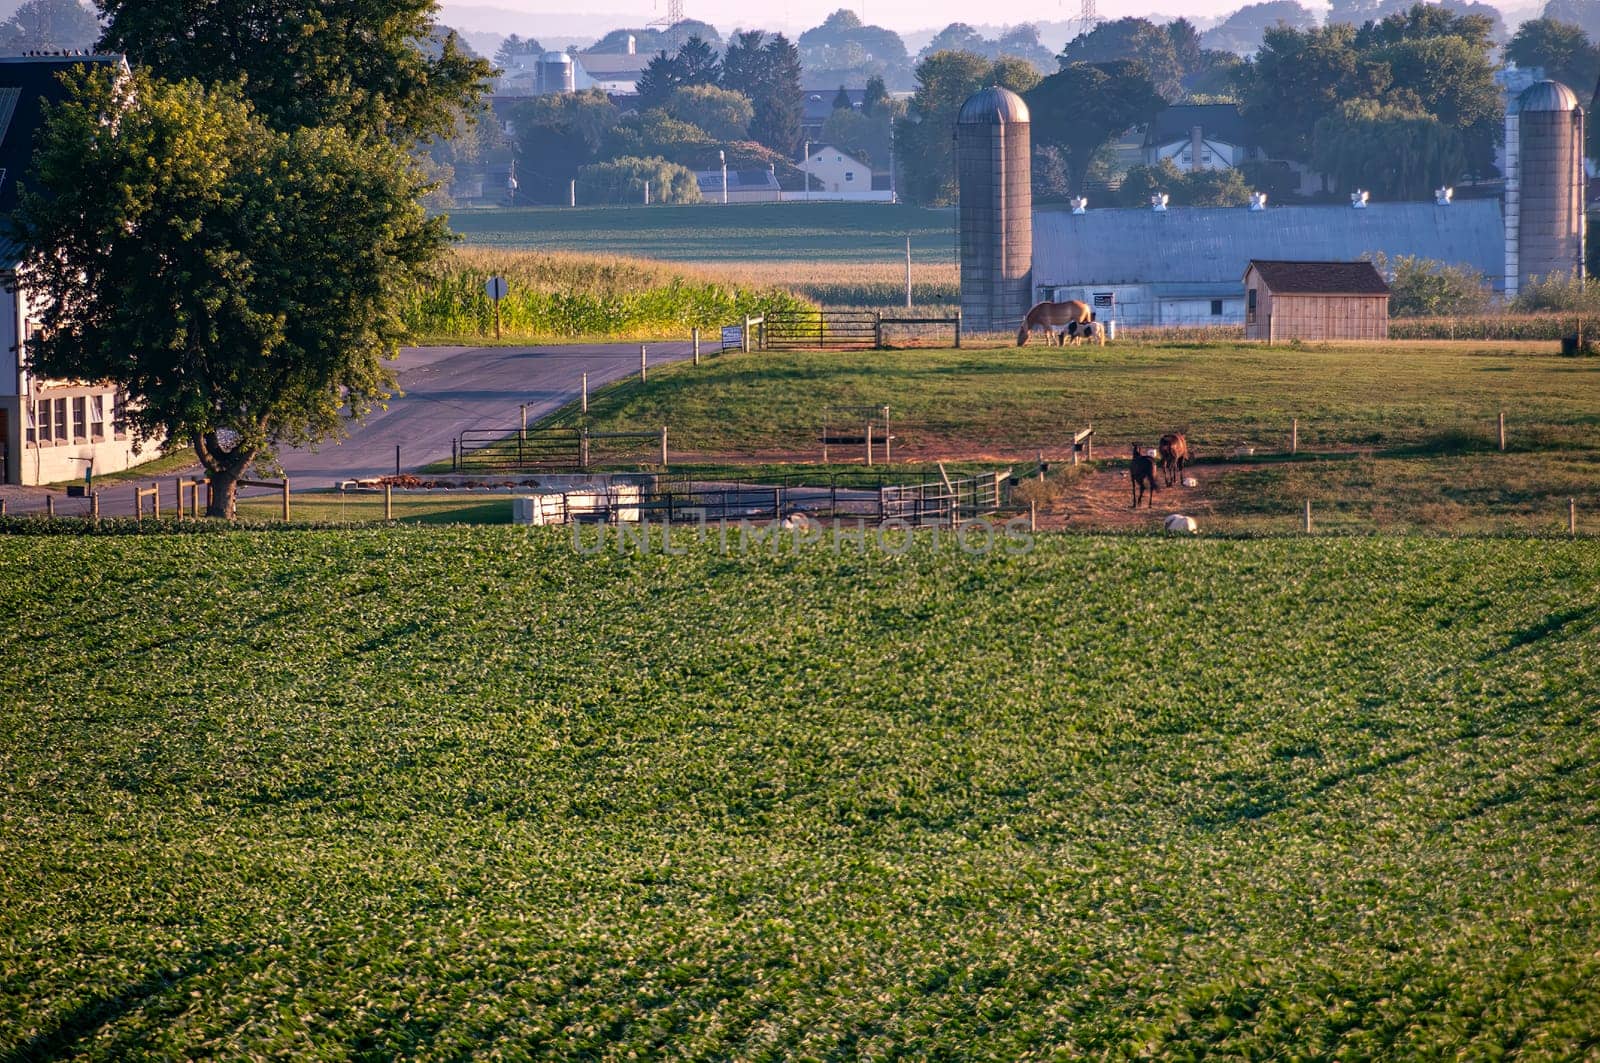 First light bathes a horse paddock adjacent to a vibrant soybean field, capturing a tranquil moment on a farm with animals grazing, perfect for themes of rural living and animal husbandry.